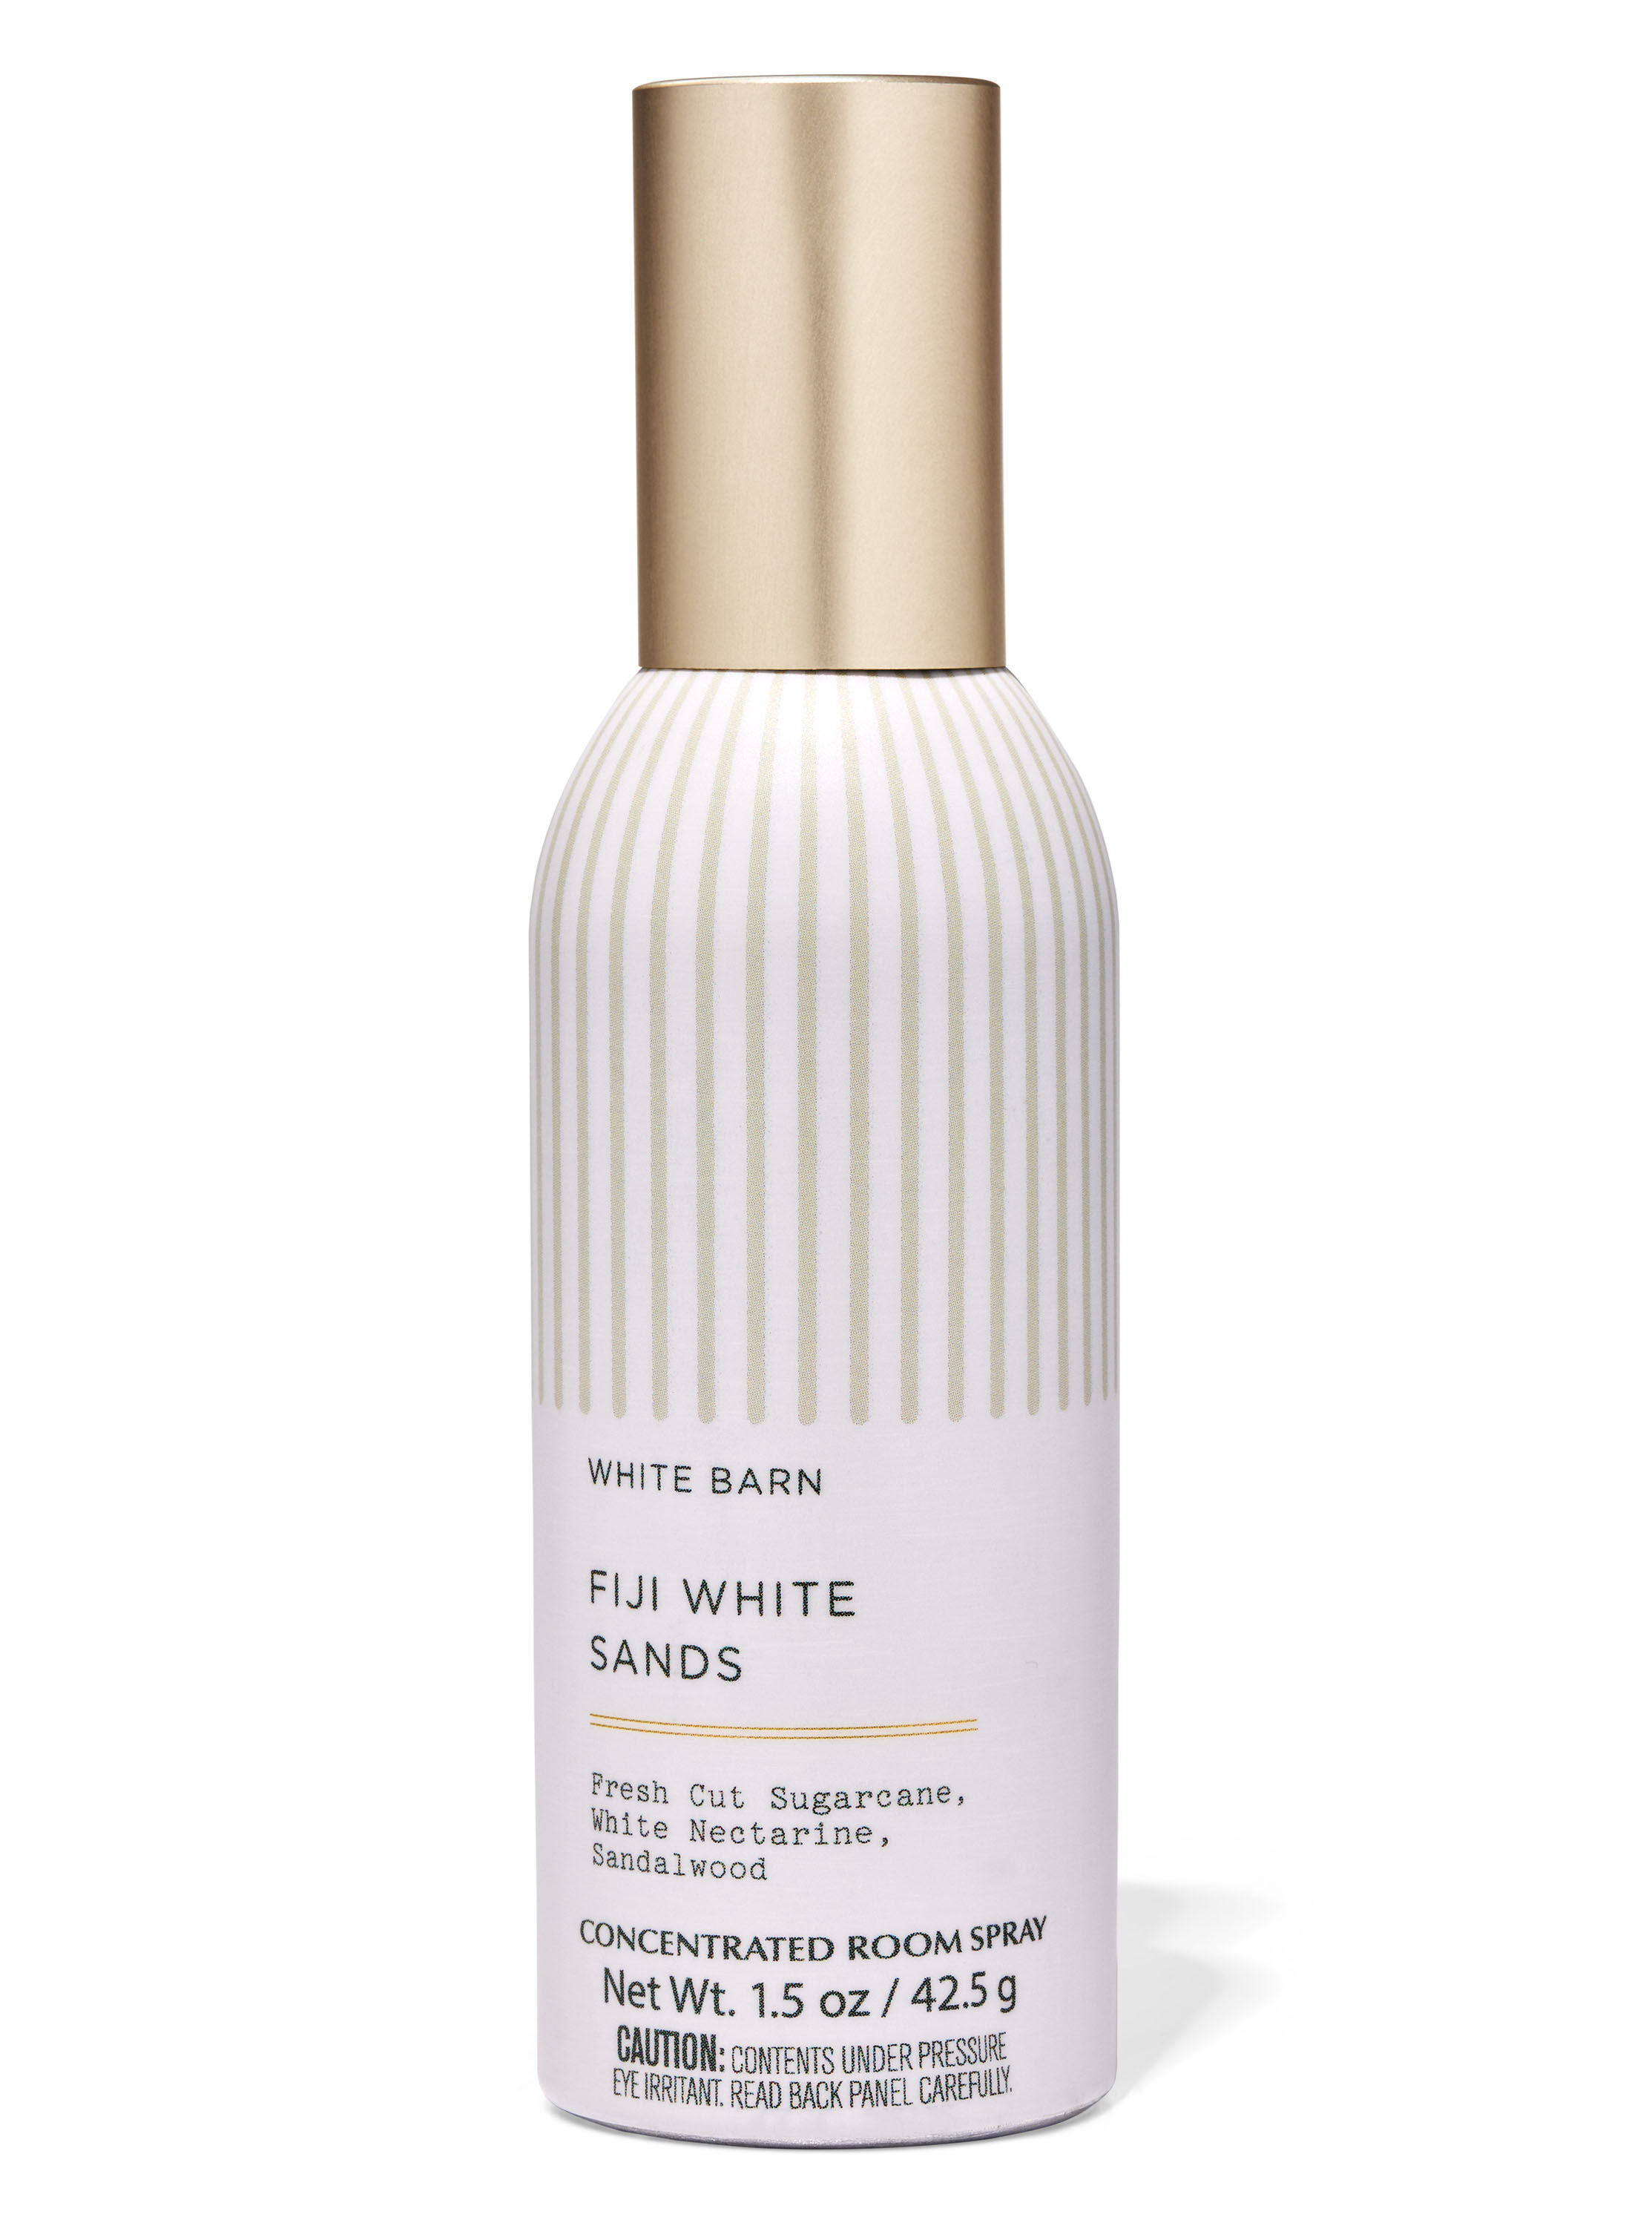 Fiji White Sands Concentrated Room Spray